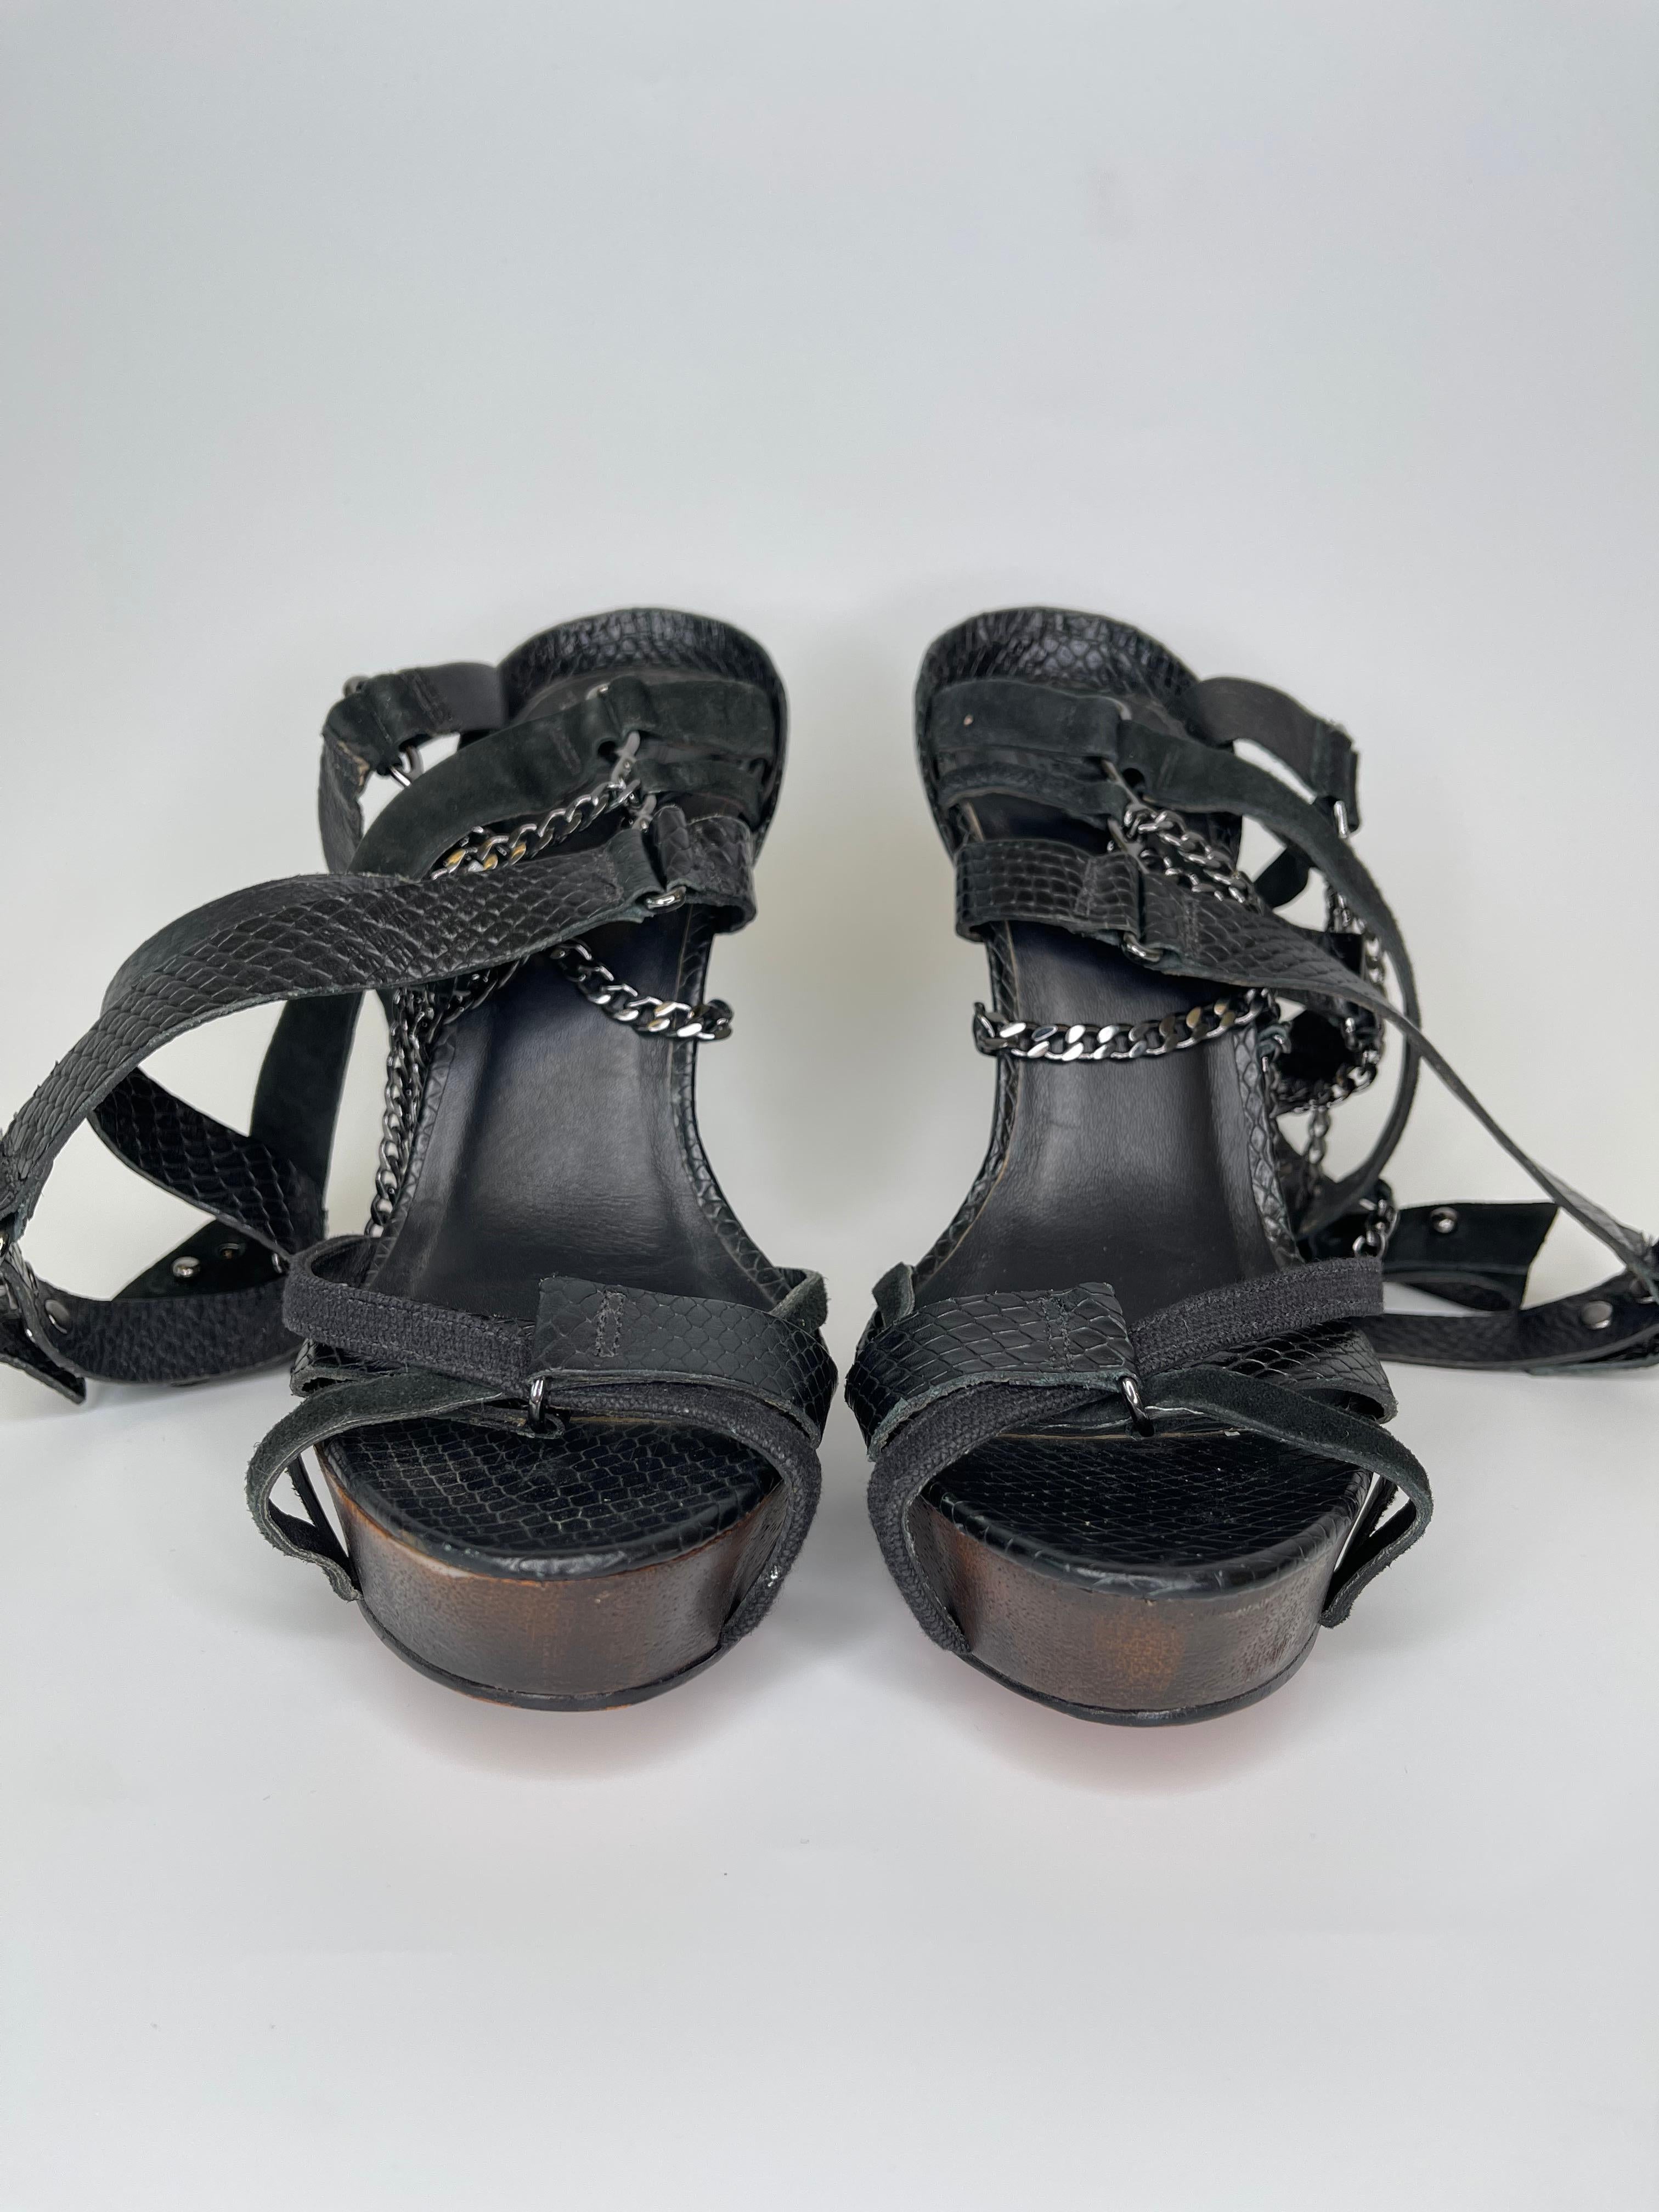 This Herve Leger Black Python Sandal consists of a classic black embossed leather with a snakeskin-like print. Open toe with multiple straps and chains to hold in place. Silver Herve Leger logo located on the back of the platform. 

COLOR: